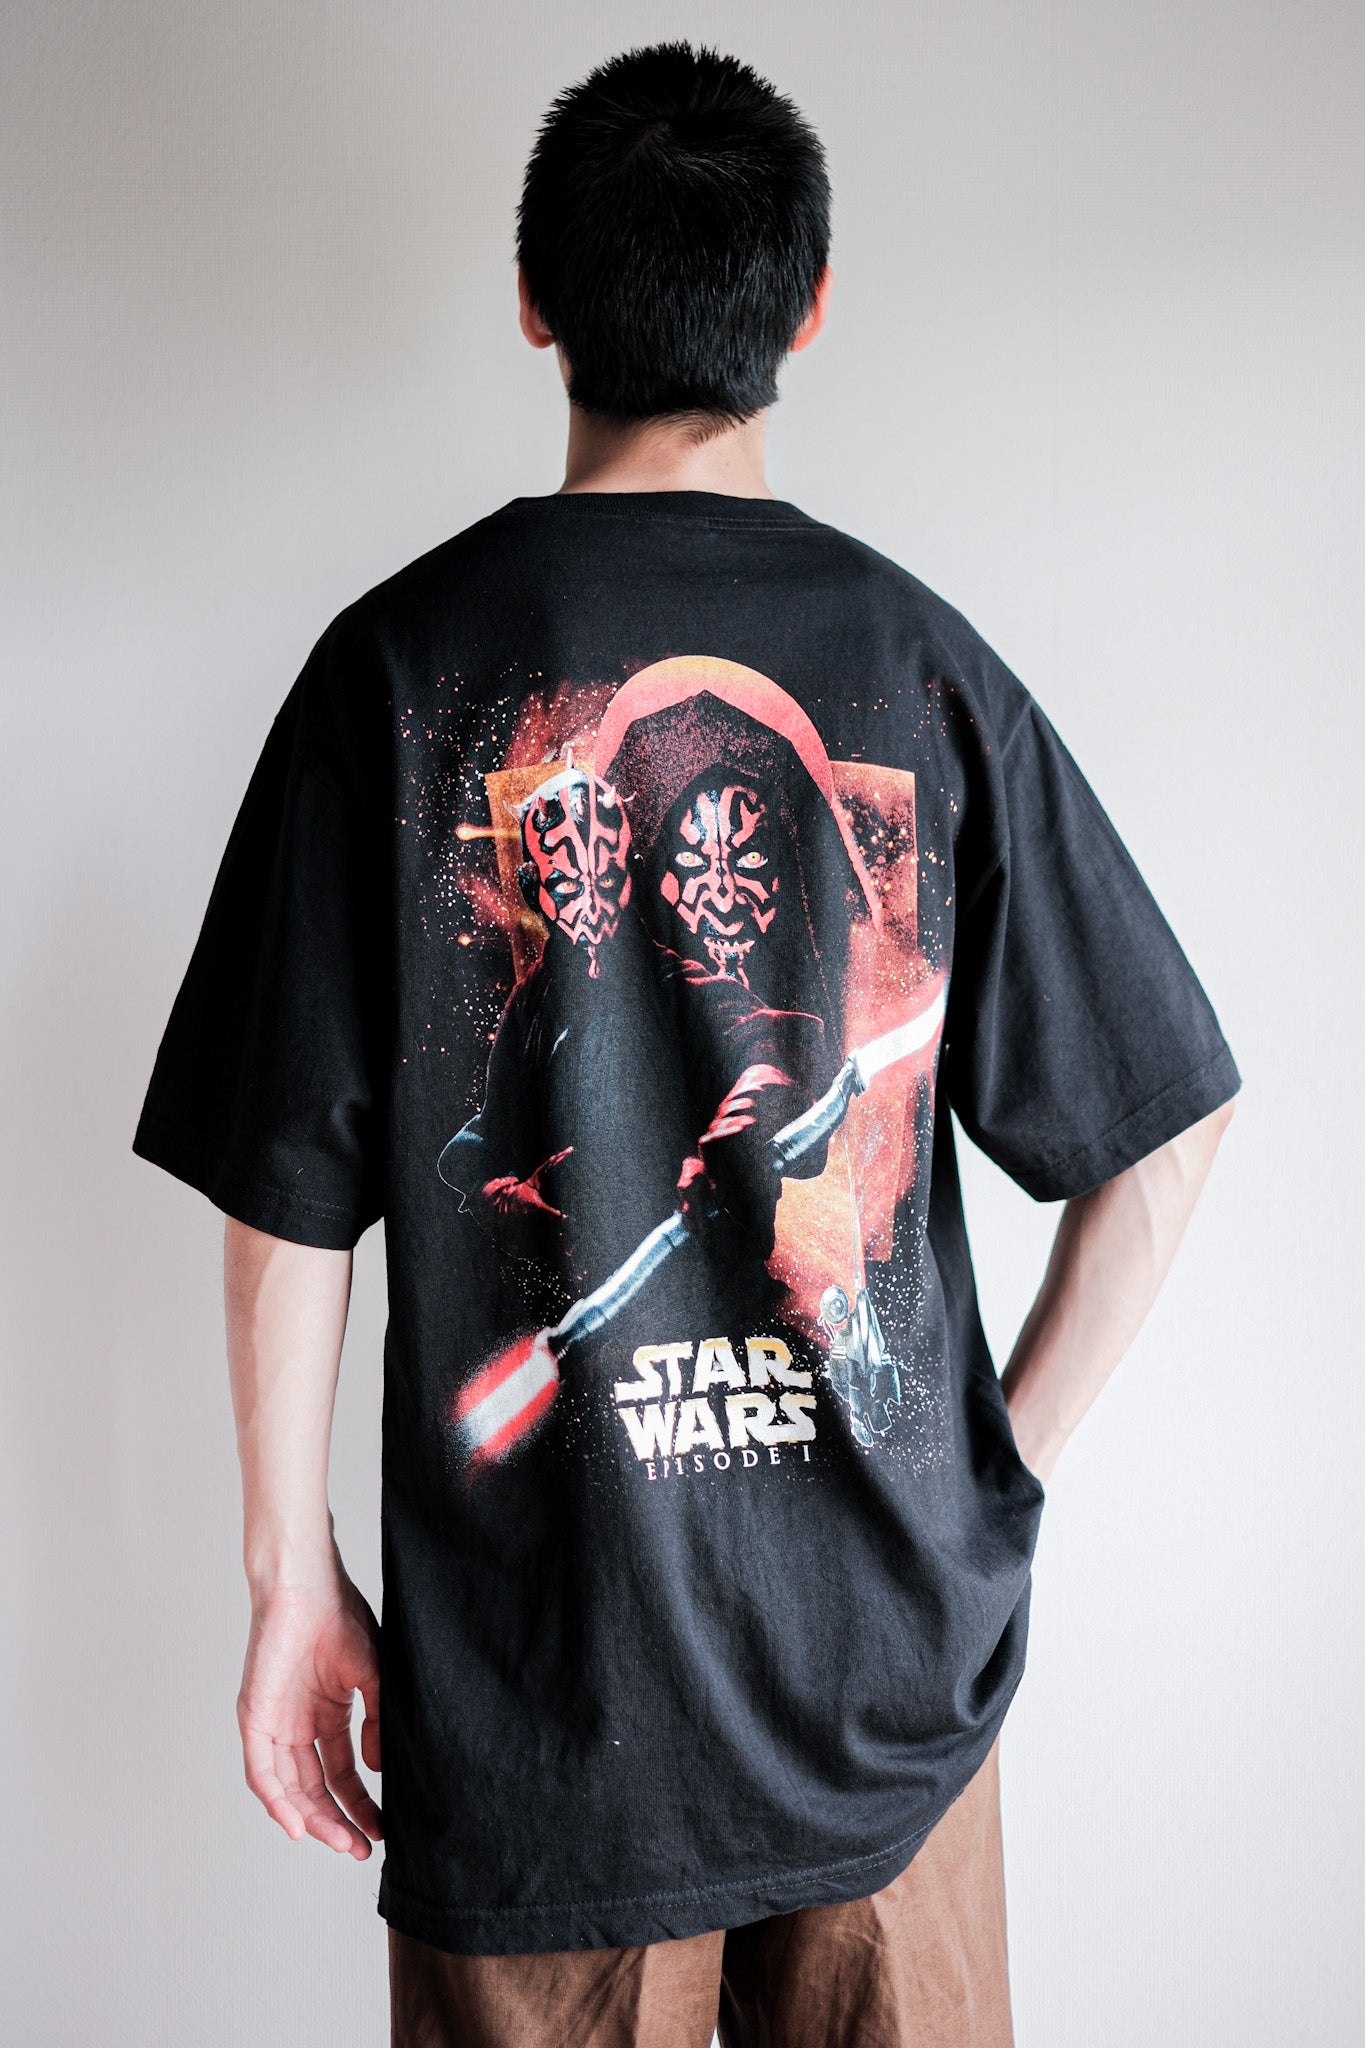 【~90's】Vintage Movie Print T-shirt Size.L "Star Wars Episode I" "Made in U.S.A."